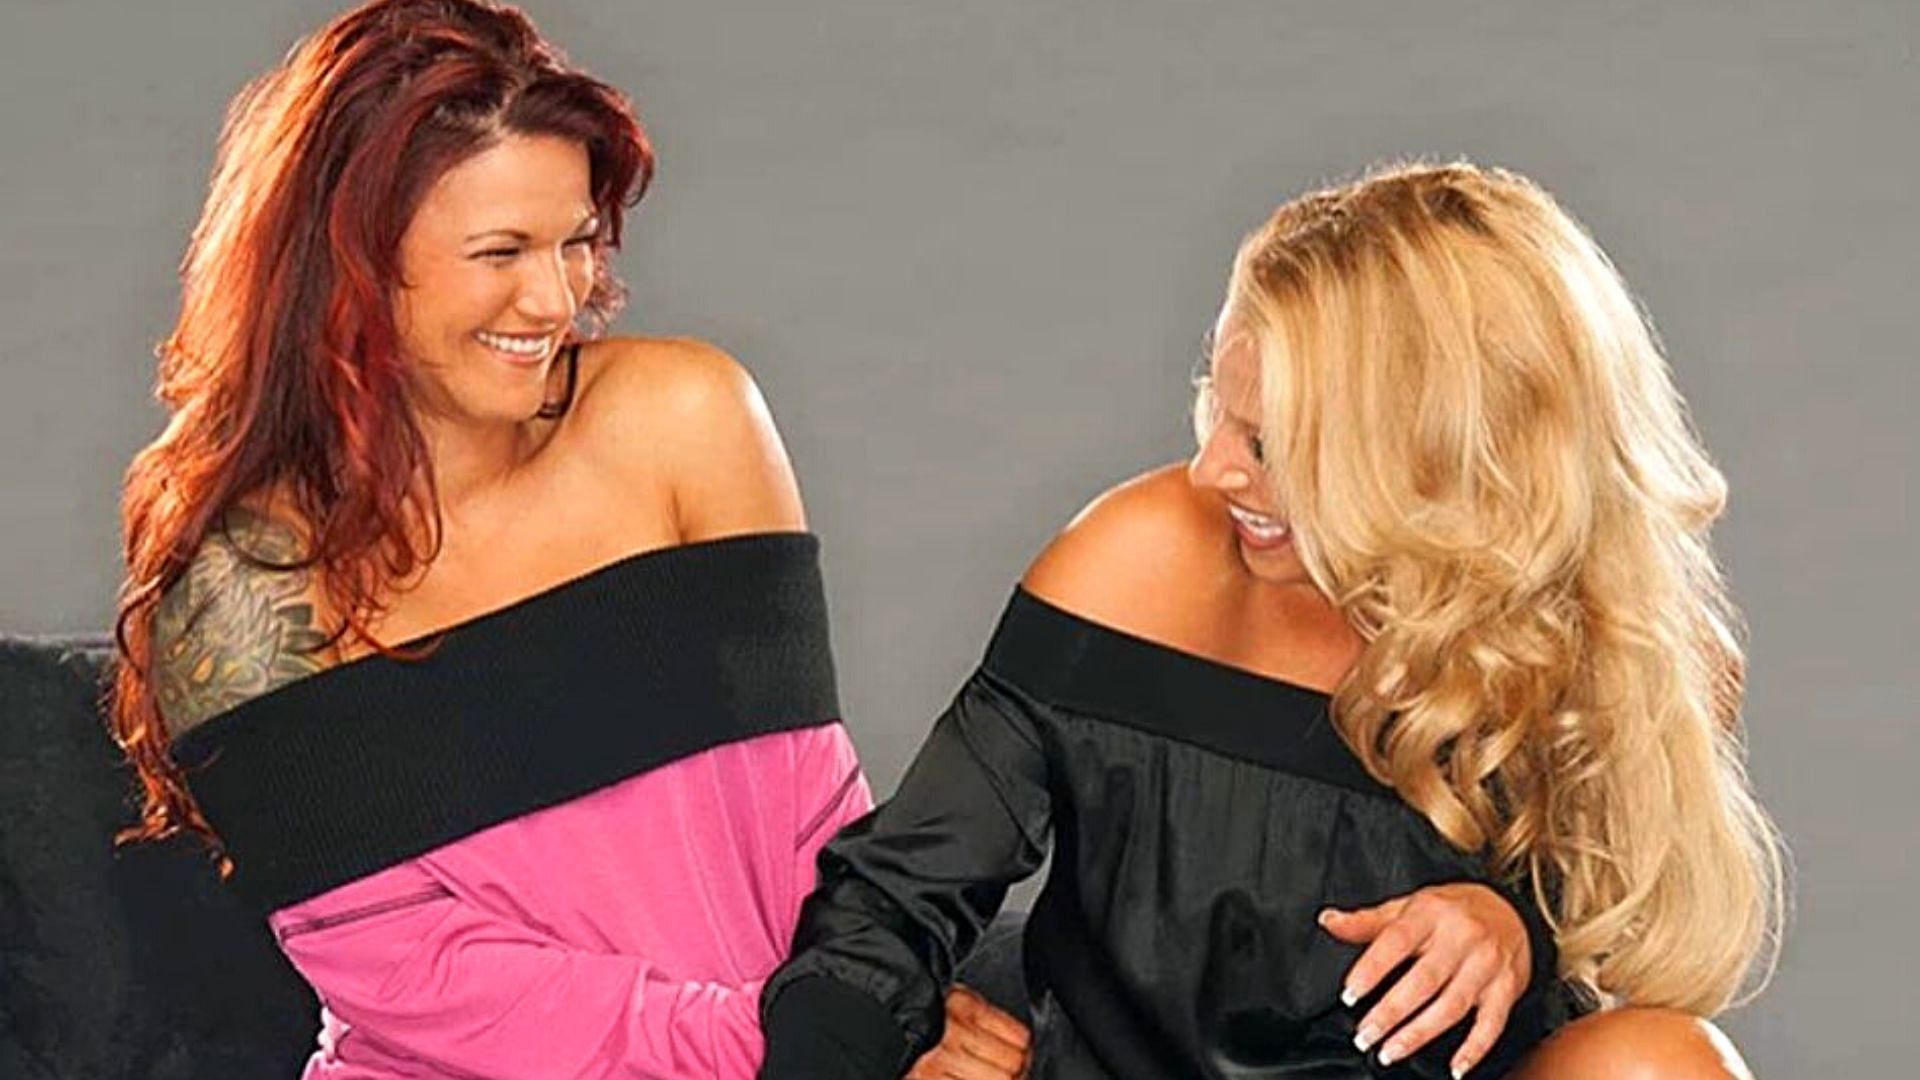 Trish Stratus and Lita are pioneers of the women